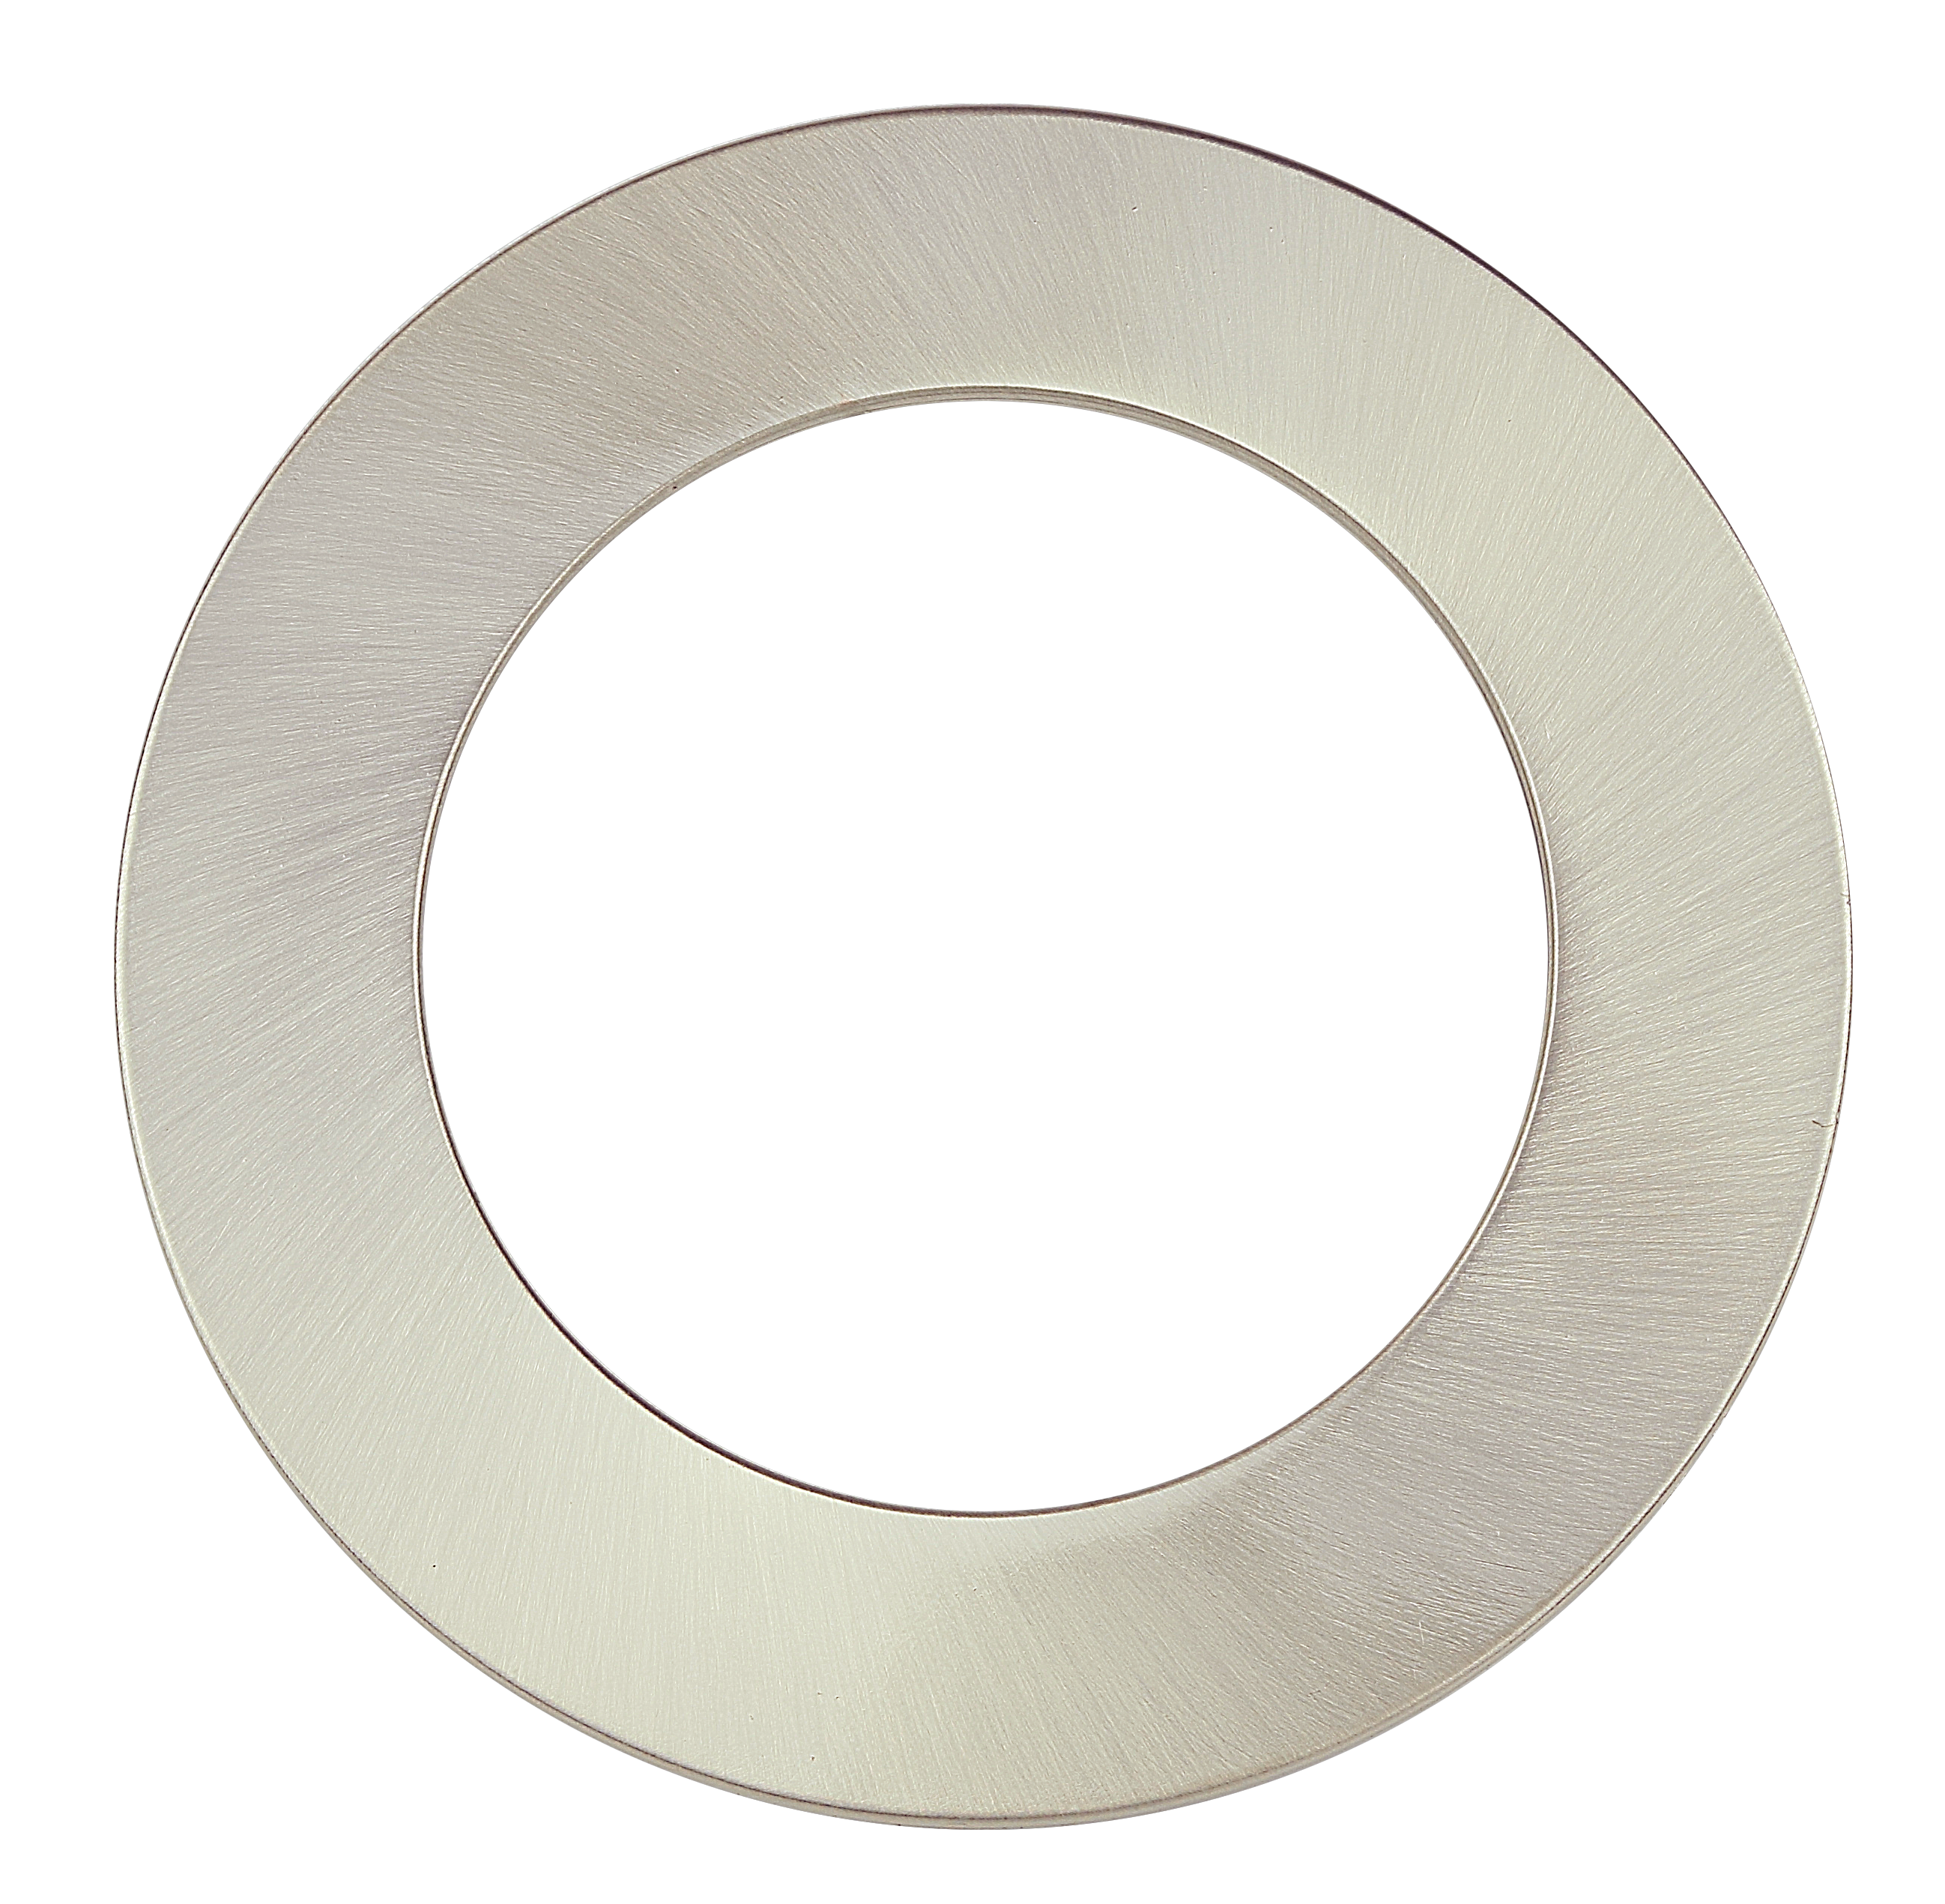 Westgate RSL4-TRM-BN 4" Round Trim for Rsl4 Series Residential Lighting - Brushed Nickel